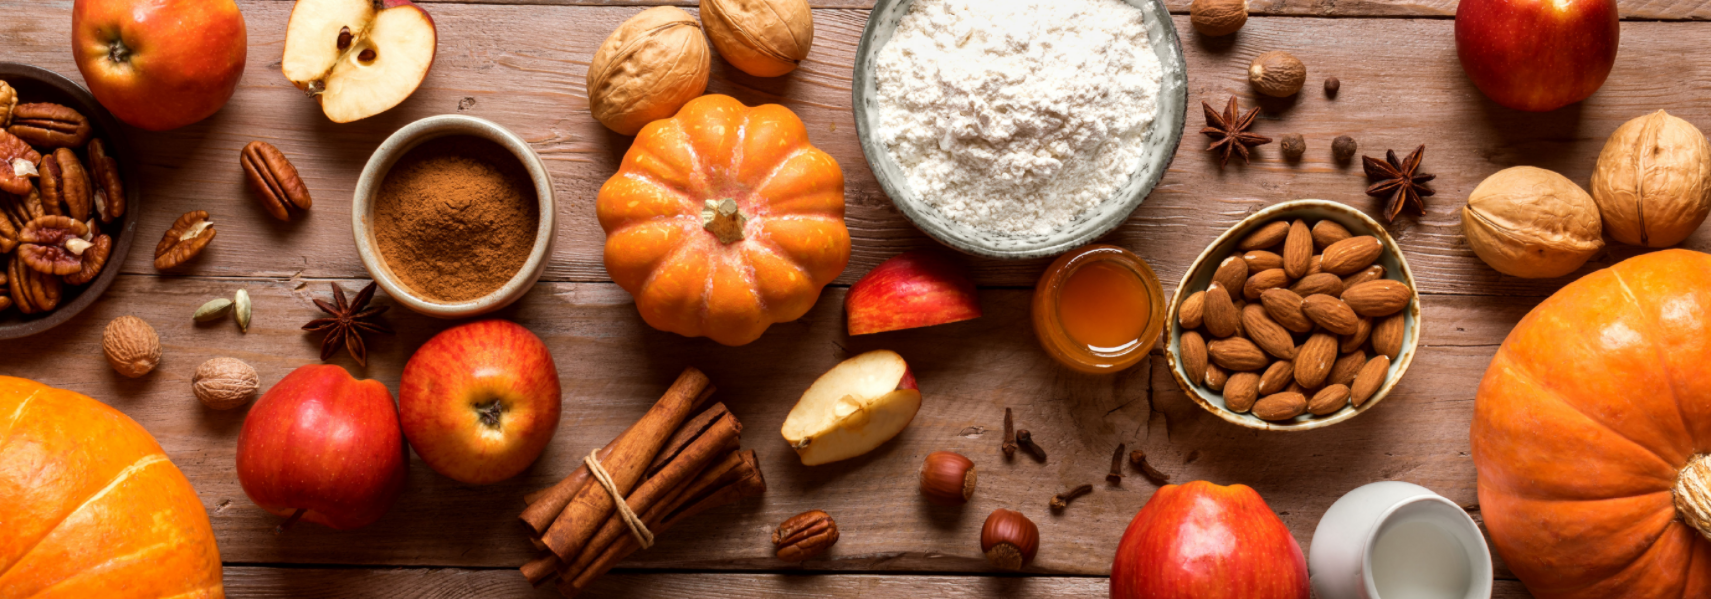 It’s a Seasonal Smorgasbord! Jump into Fall with these renal-friendly recipes - 